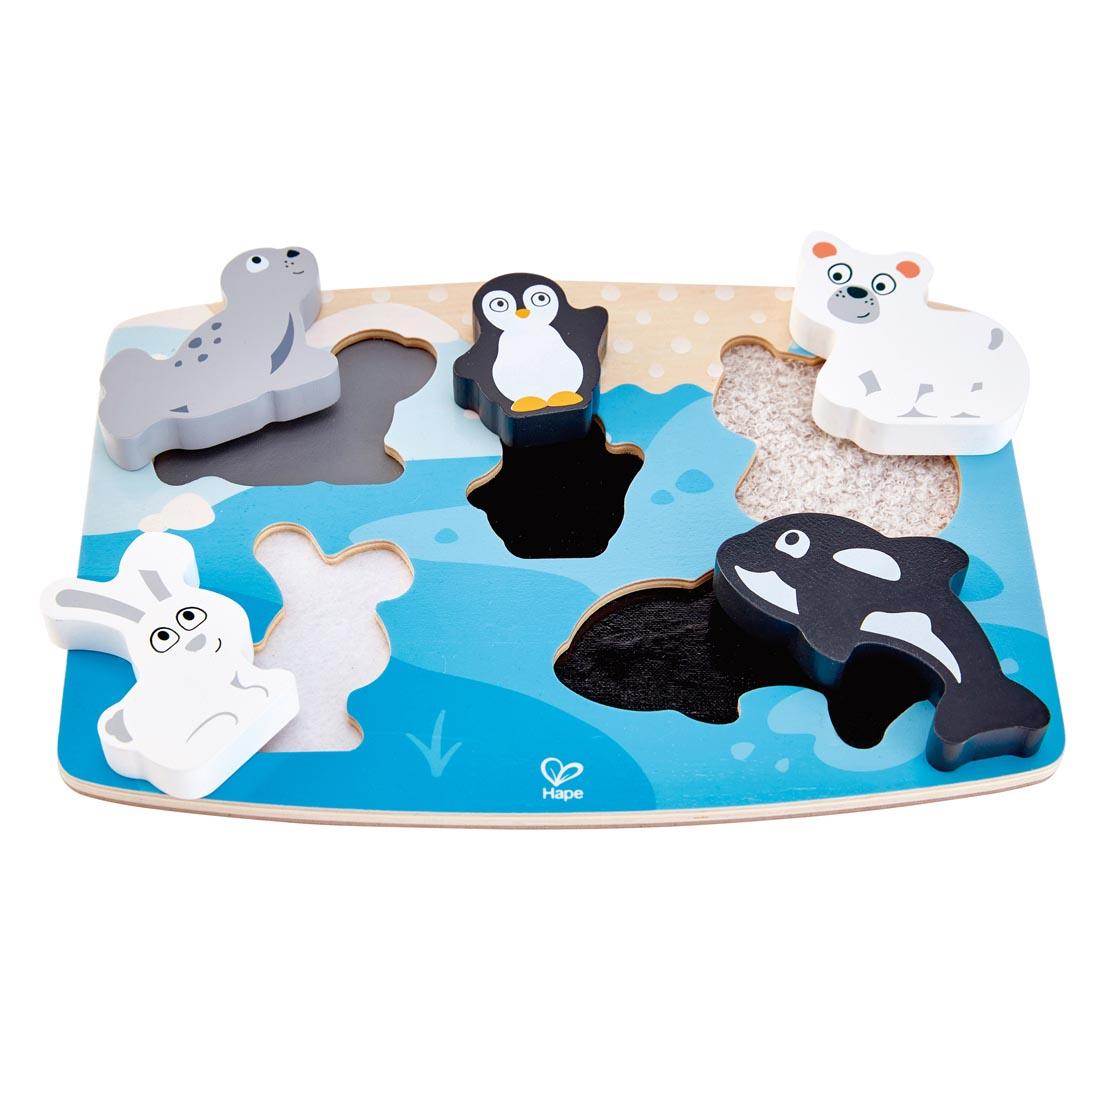 Hape Polar Animal Tactile Puzzle with pieces sitting outside their spaces